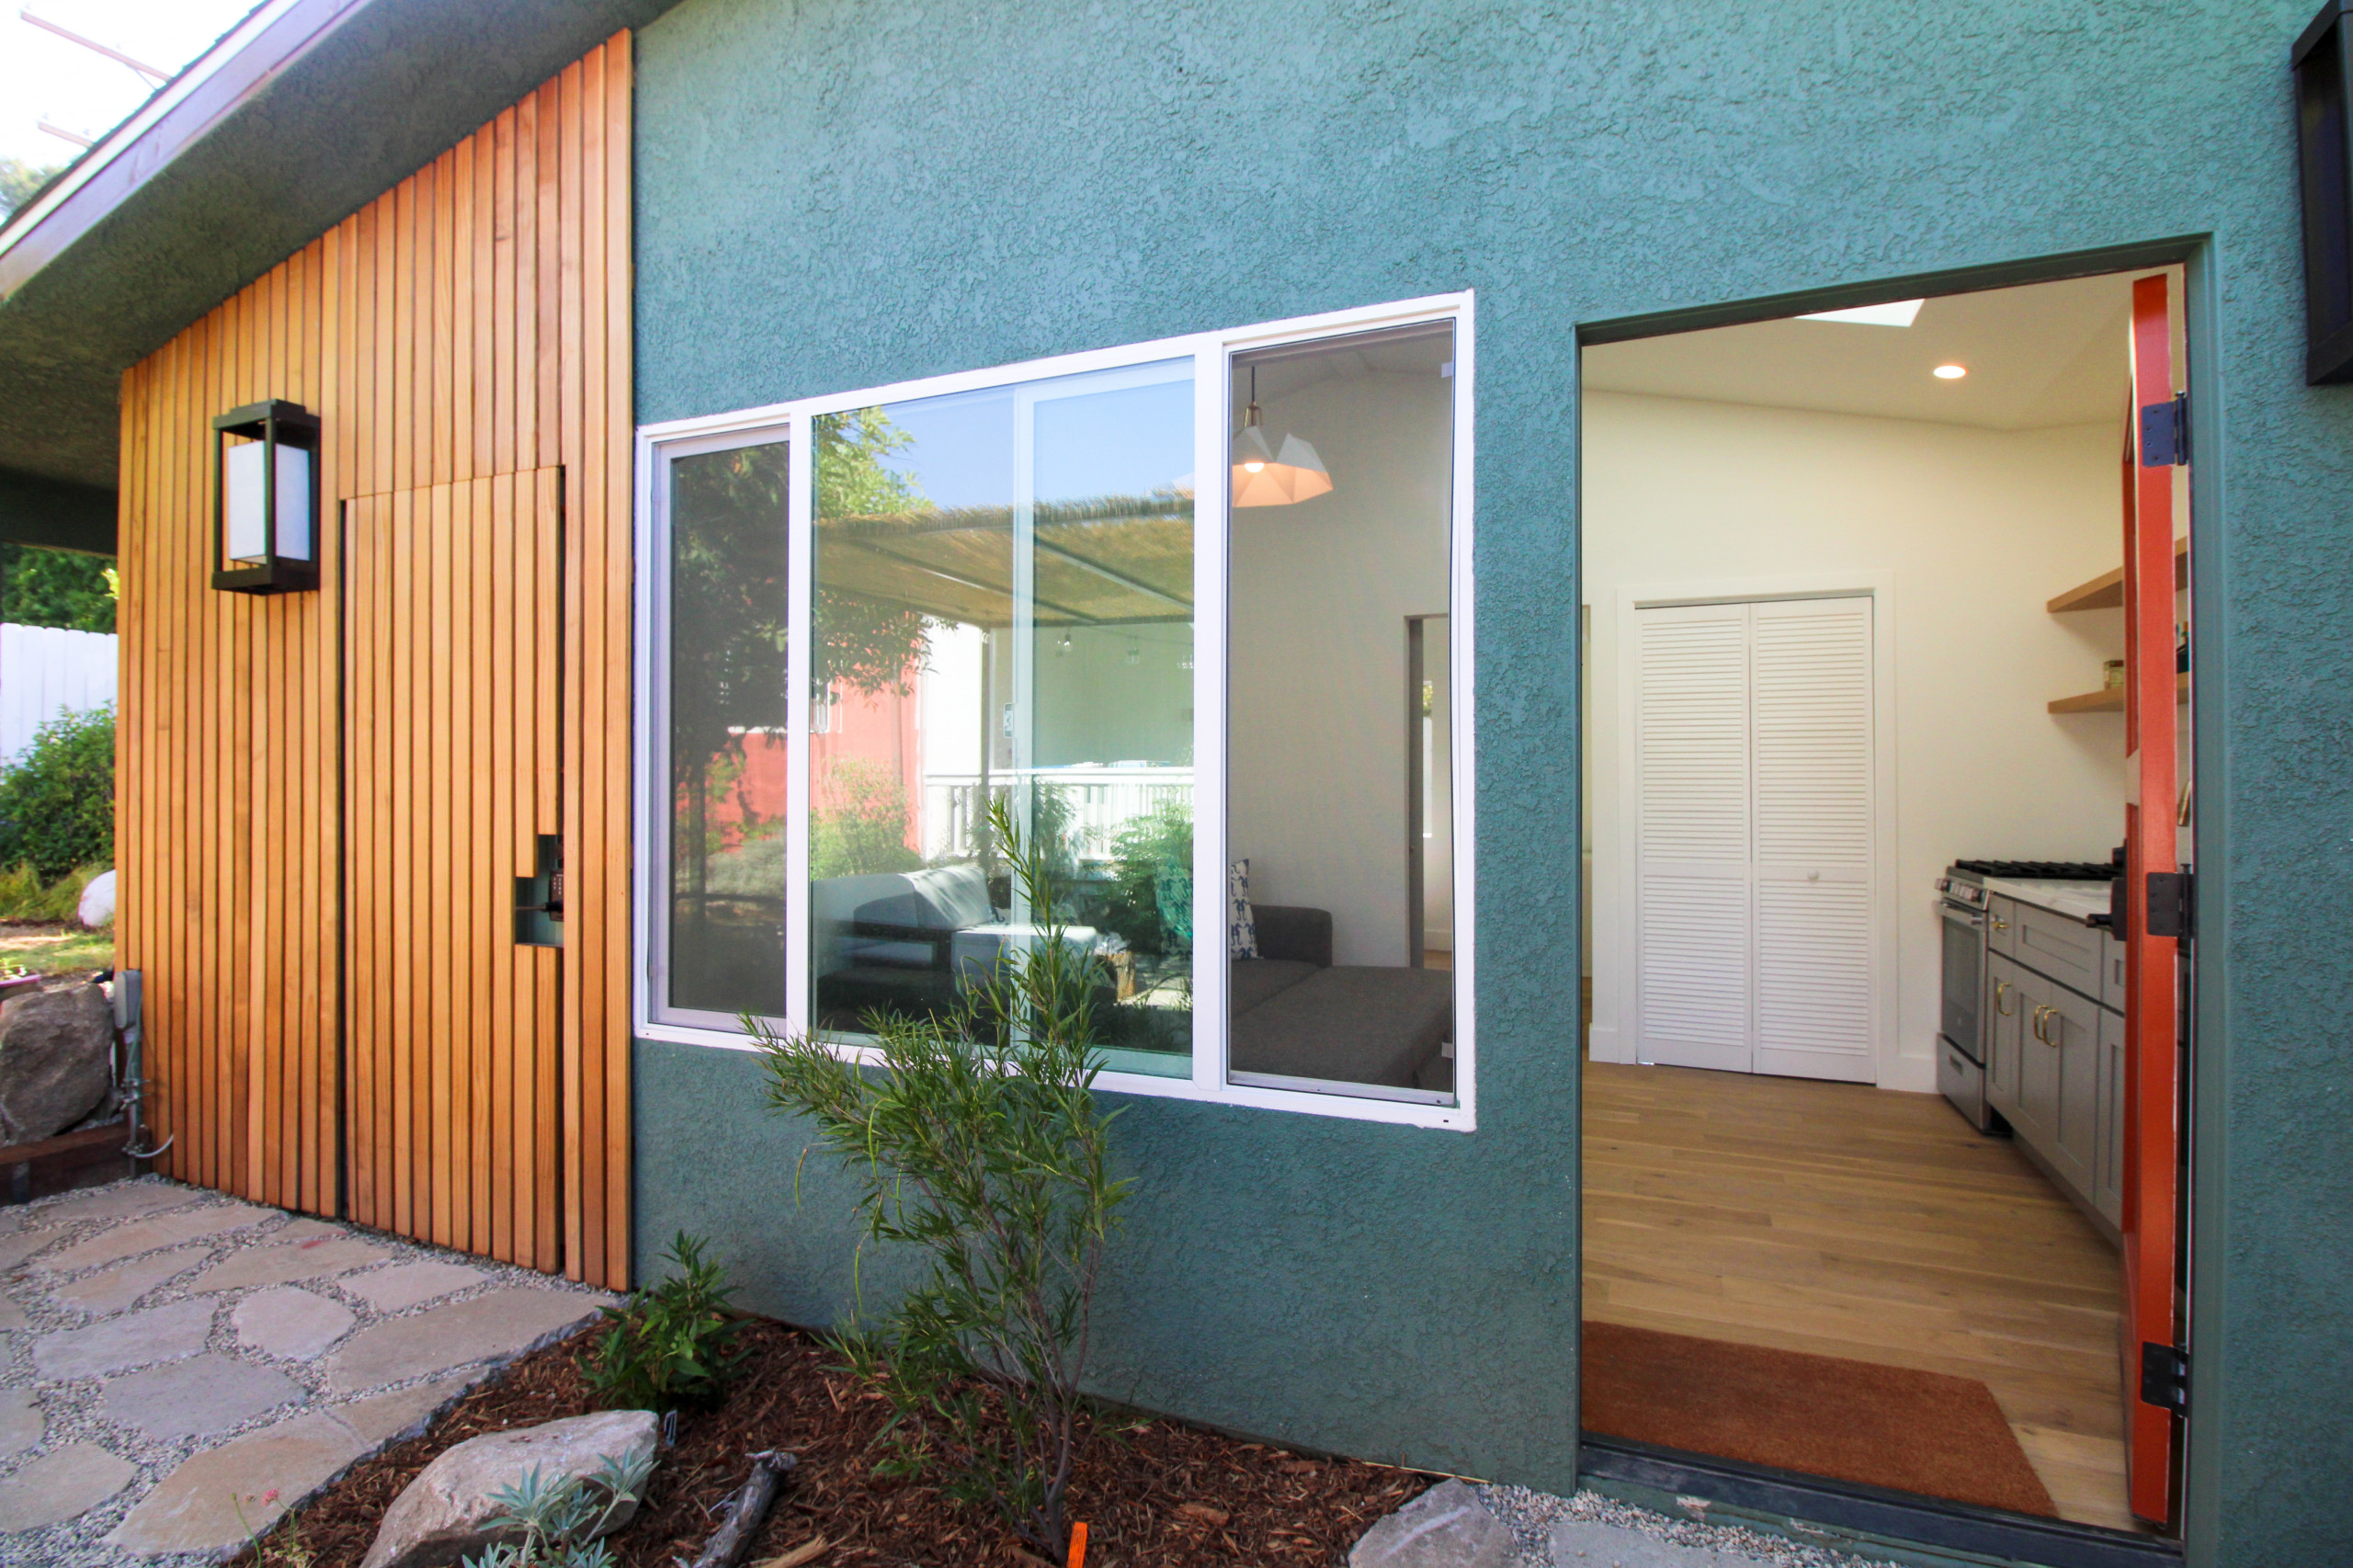 Eagle Rock, CA / Complete Accessory Dwelling Unit Build / Front Patio and Entry